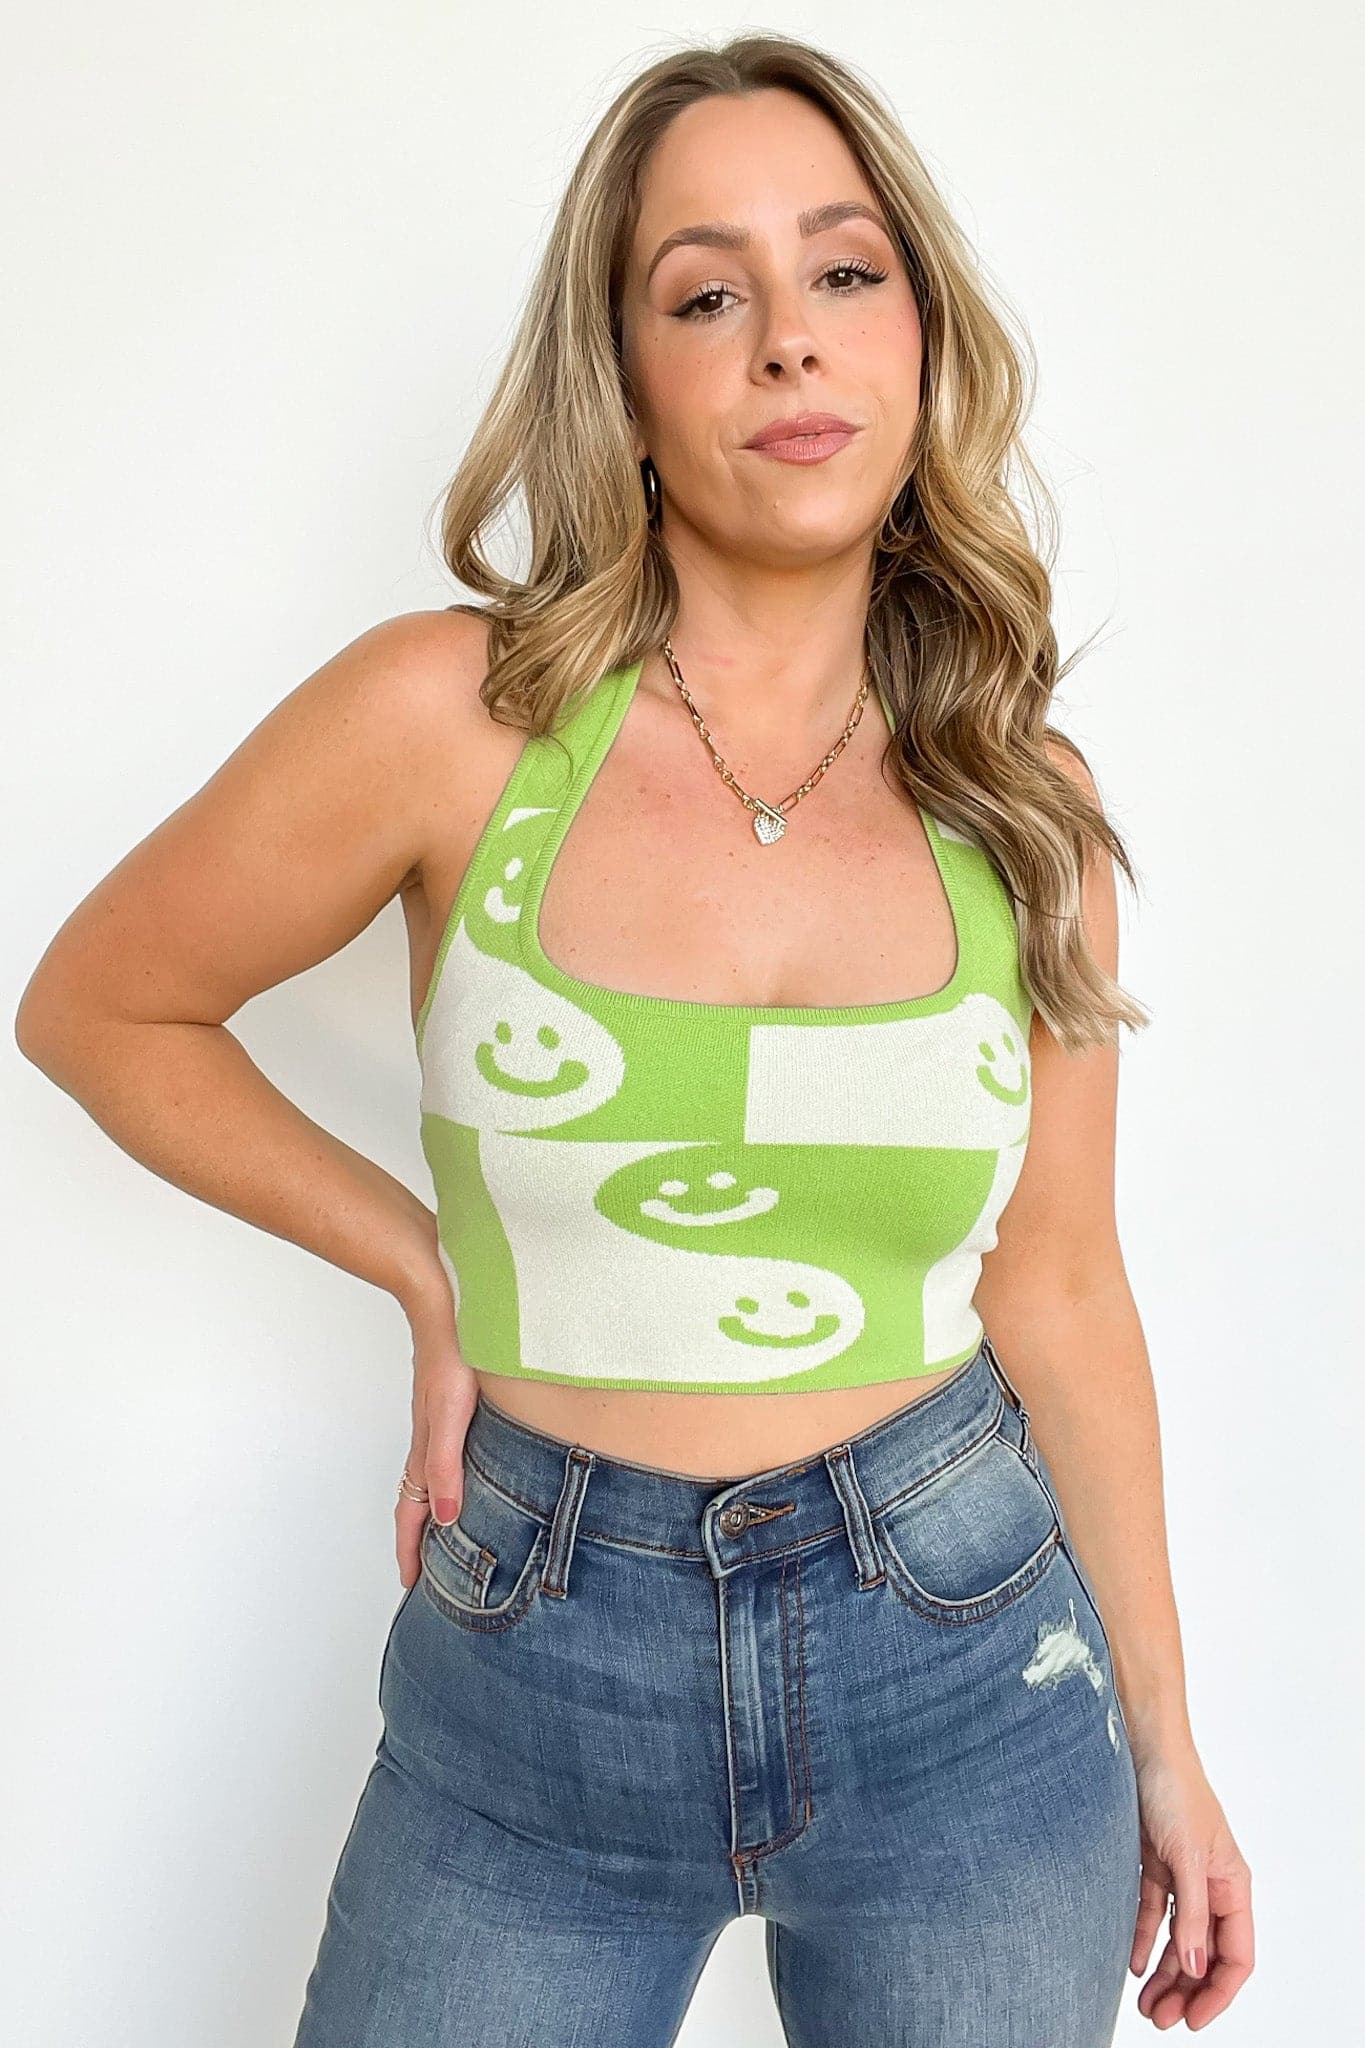  Cute to the Max Smiley Face Knit Halter Top - FINAL SALE - Madison and Mallory